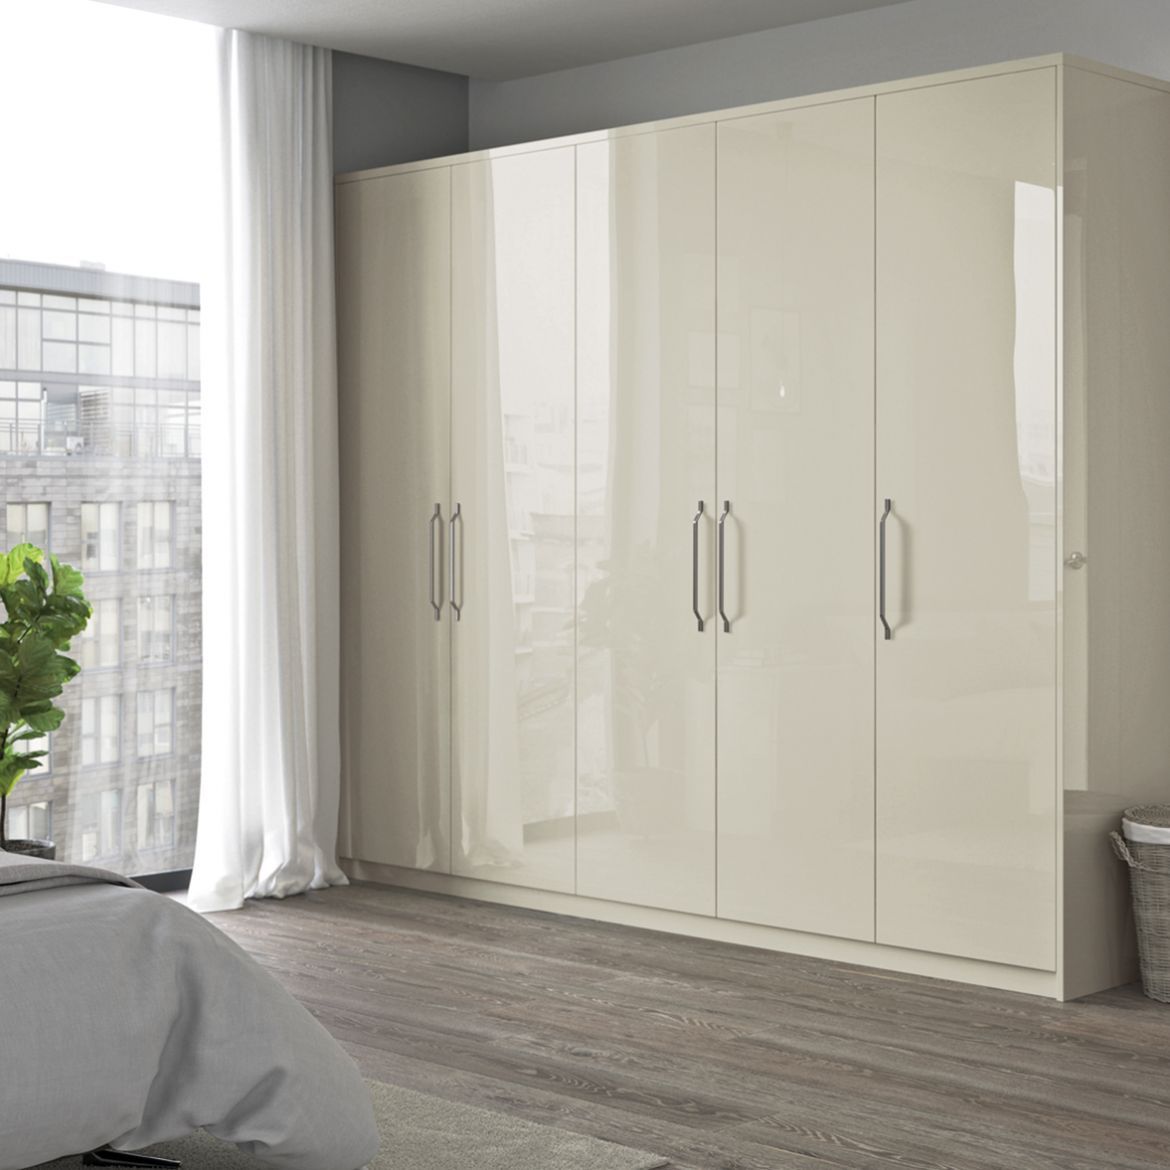 Reflections Wardrobe | Cash & Carry Kitchens Within Cream Gloss Wardrobes (Photo 3 of 15)